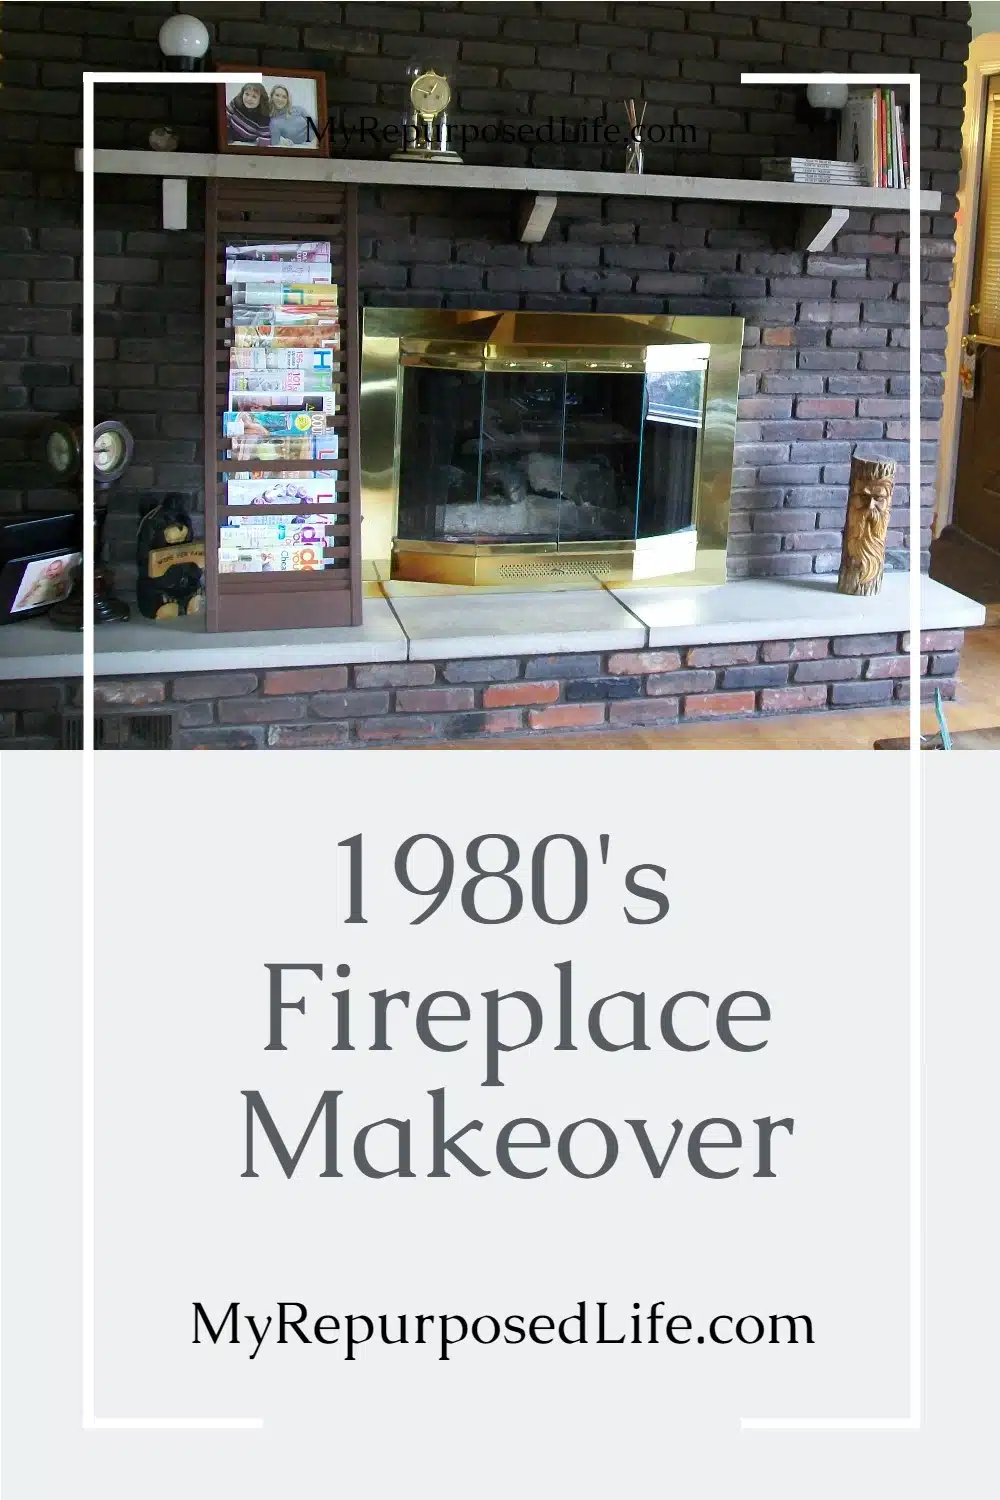 How to add wood to encase an ugly mantel and hearth on a brick fireplace. Add white paint and you have a fabulous makeover that will make you smile every time you look at it! New look for about $150. #MyRepurposedLife via @repurposedlife